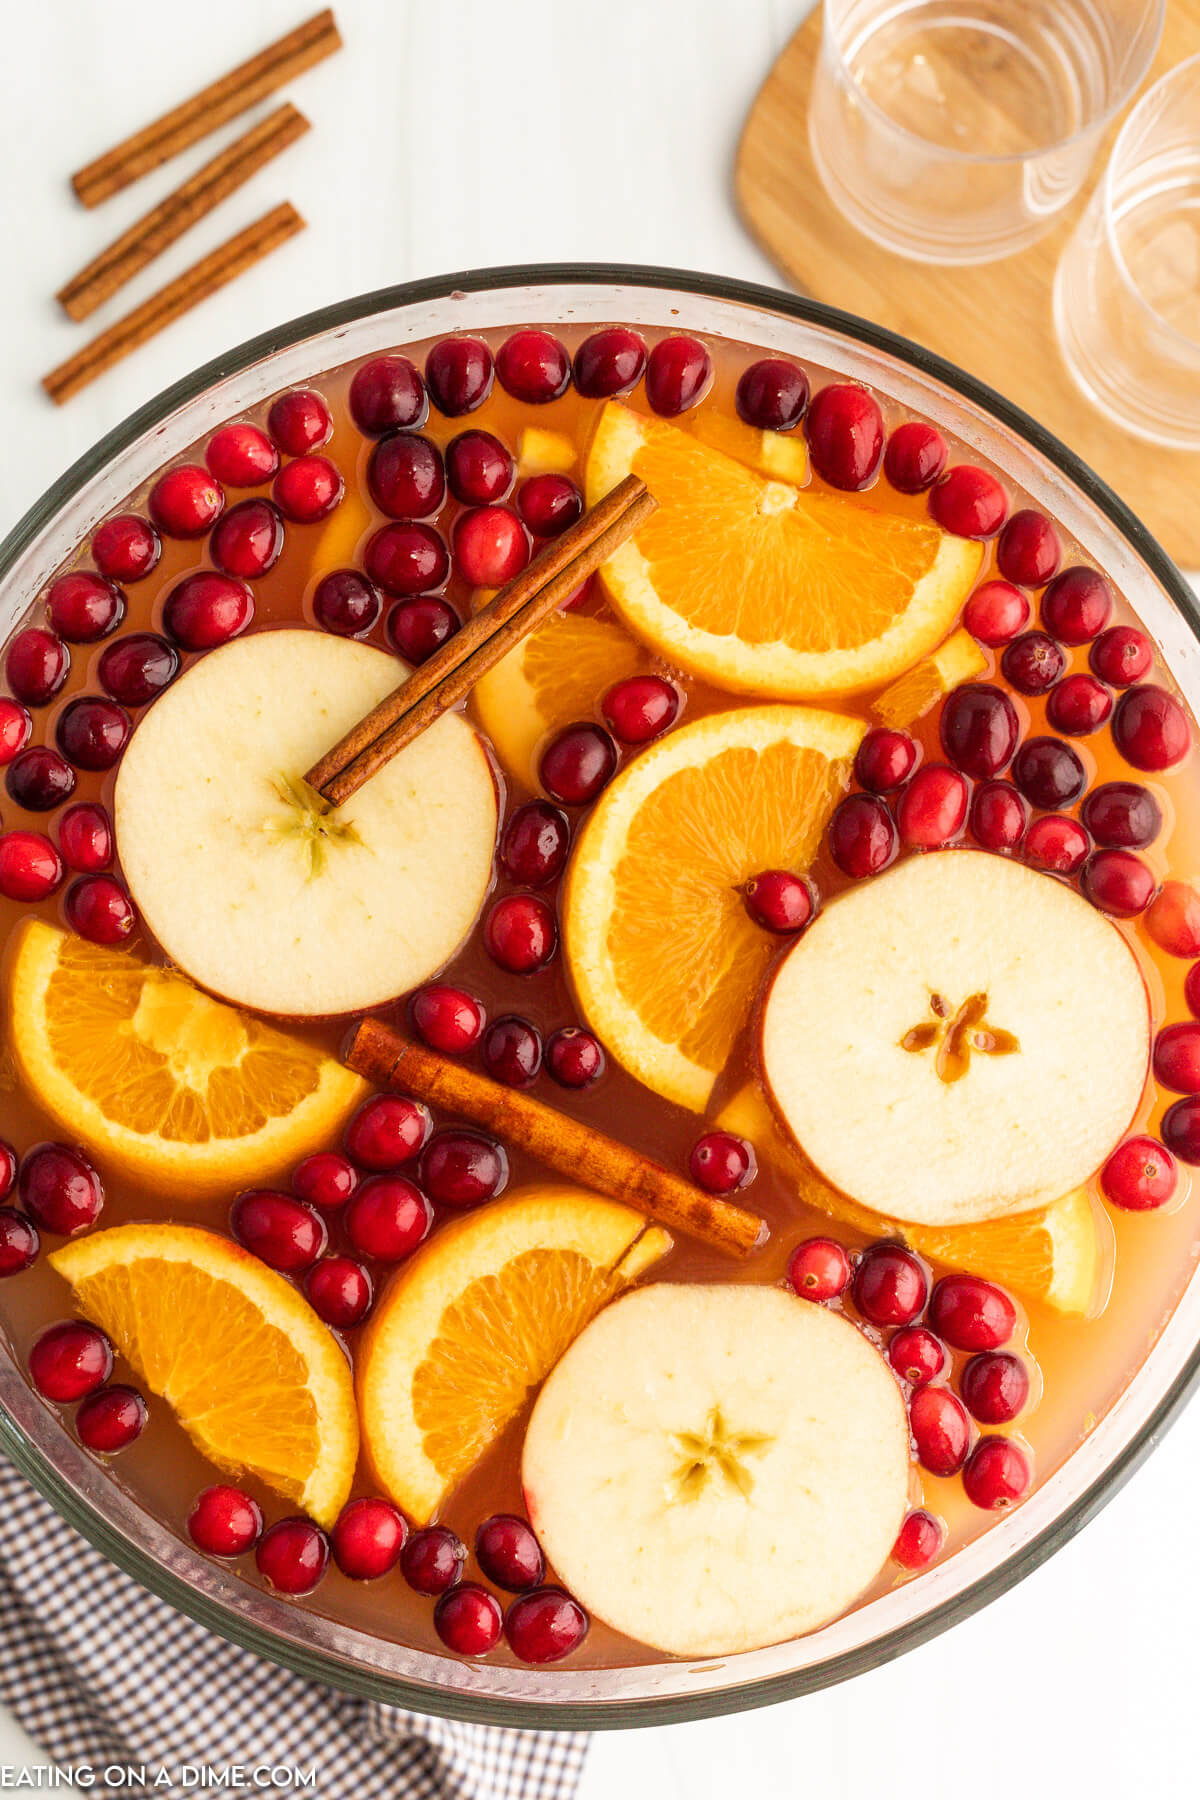 Easy Thanksgiving Punch Recipe - Play Party Plan